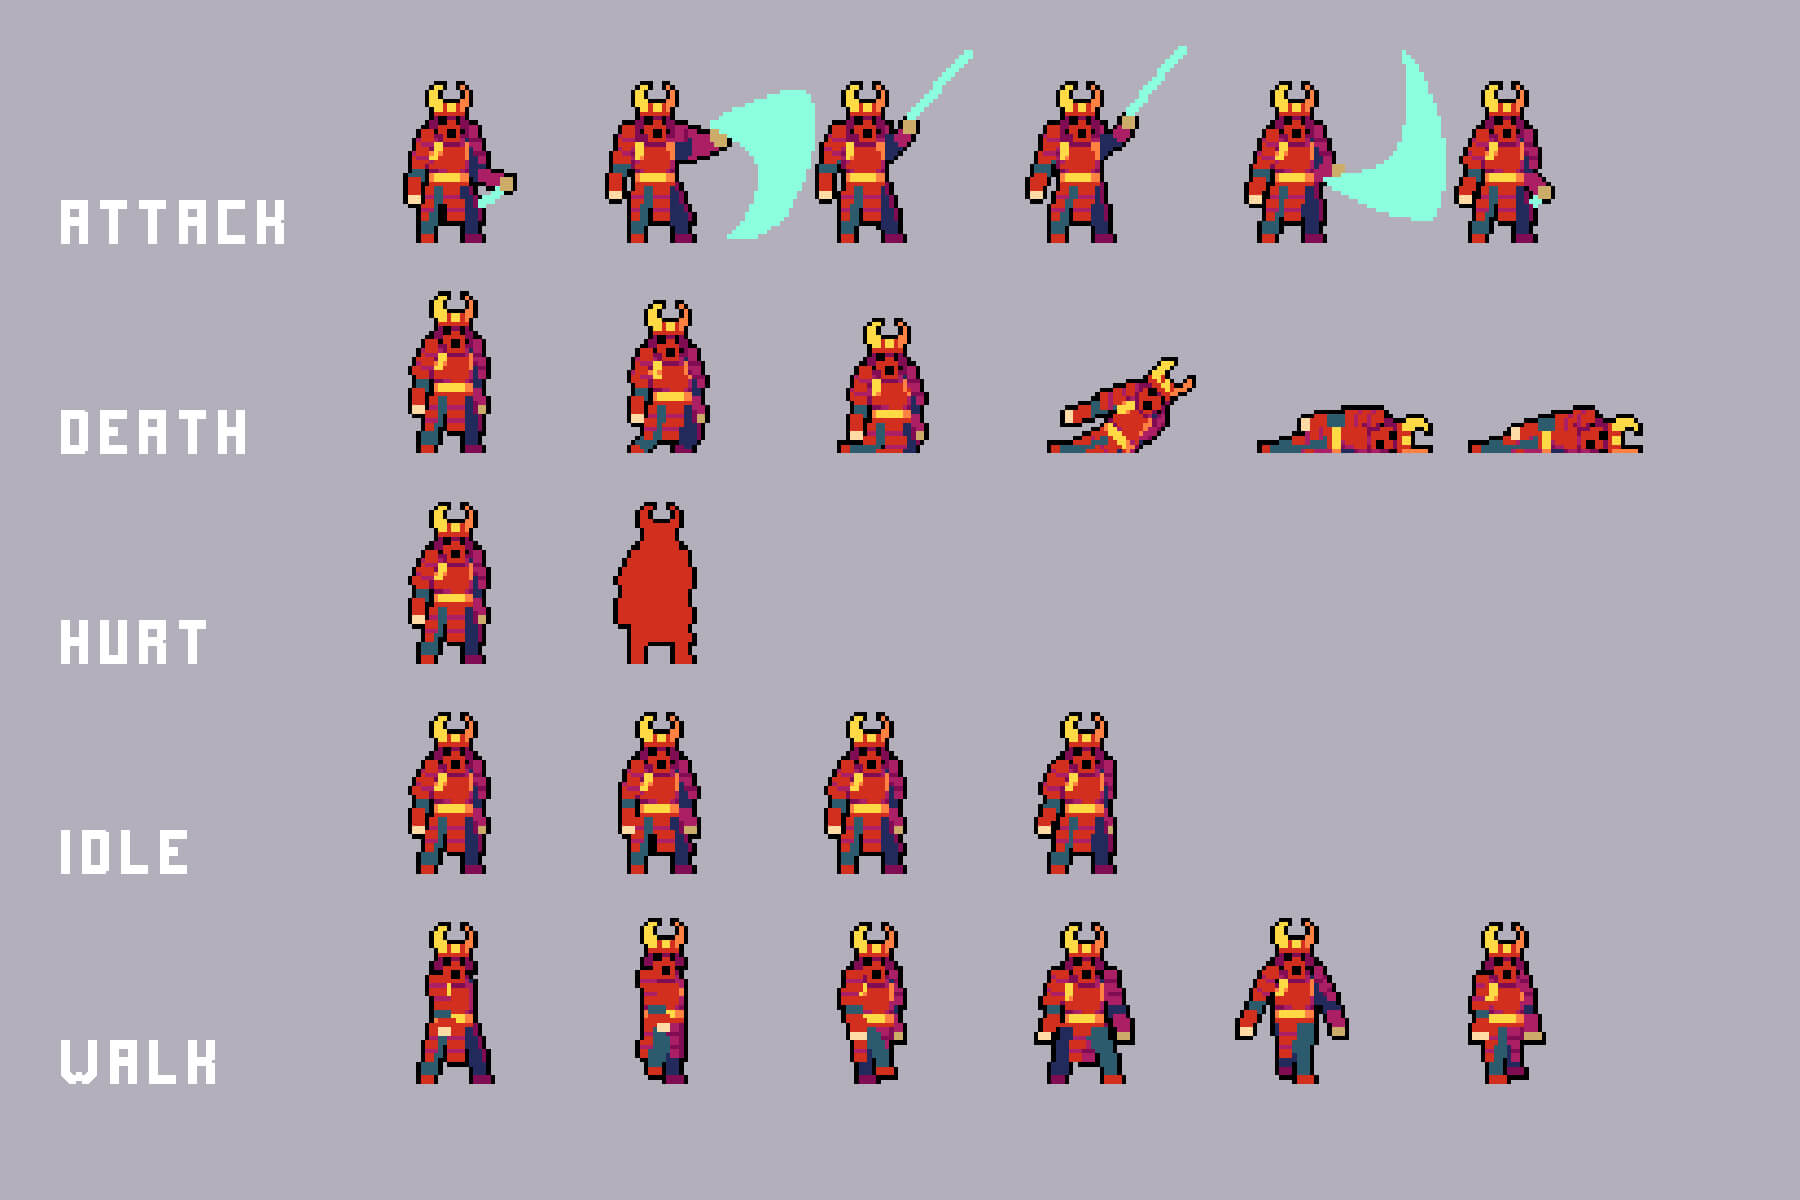 Enemies Pixel Art Asset Pack by Free Game Assets (GUI, Sprite, Tilesets)